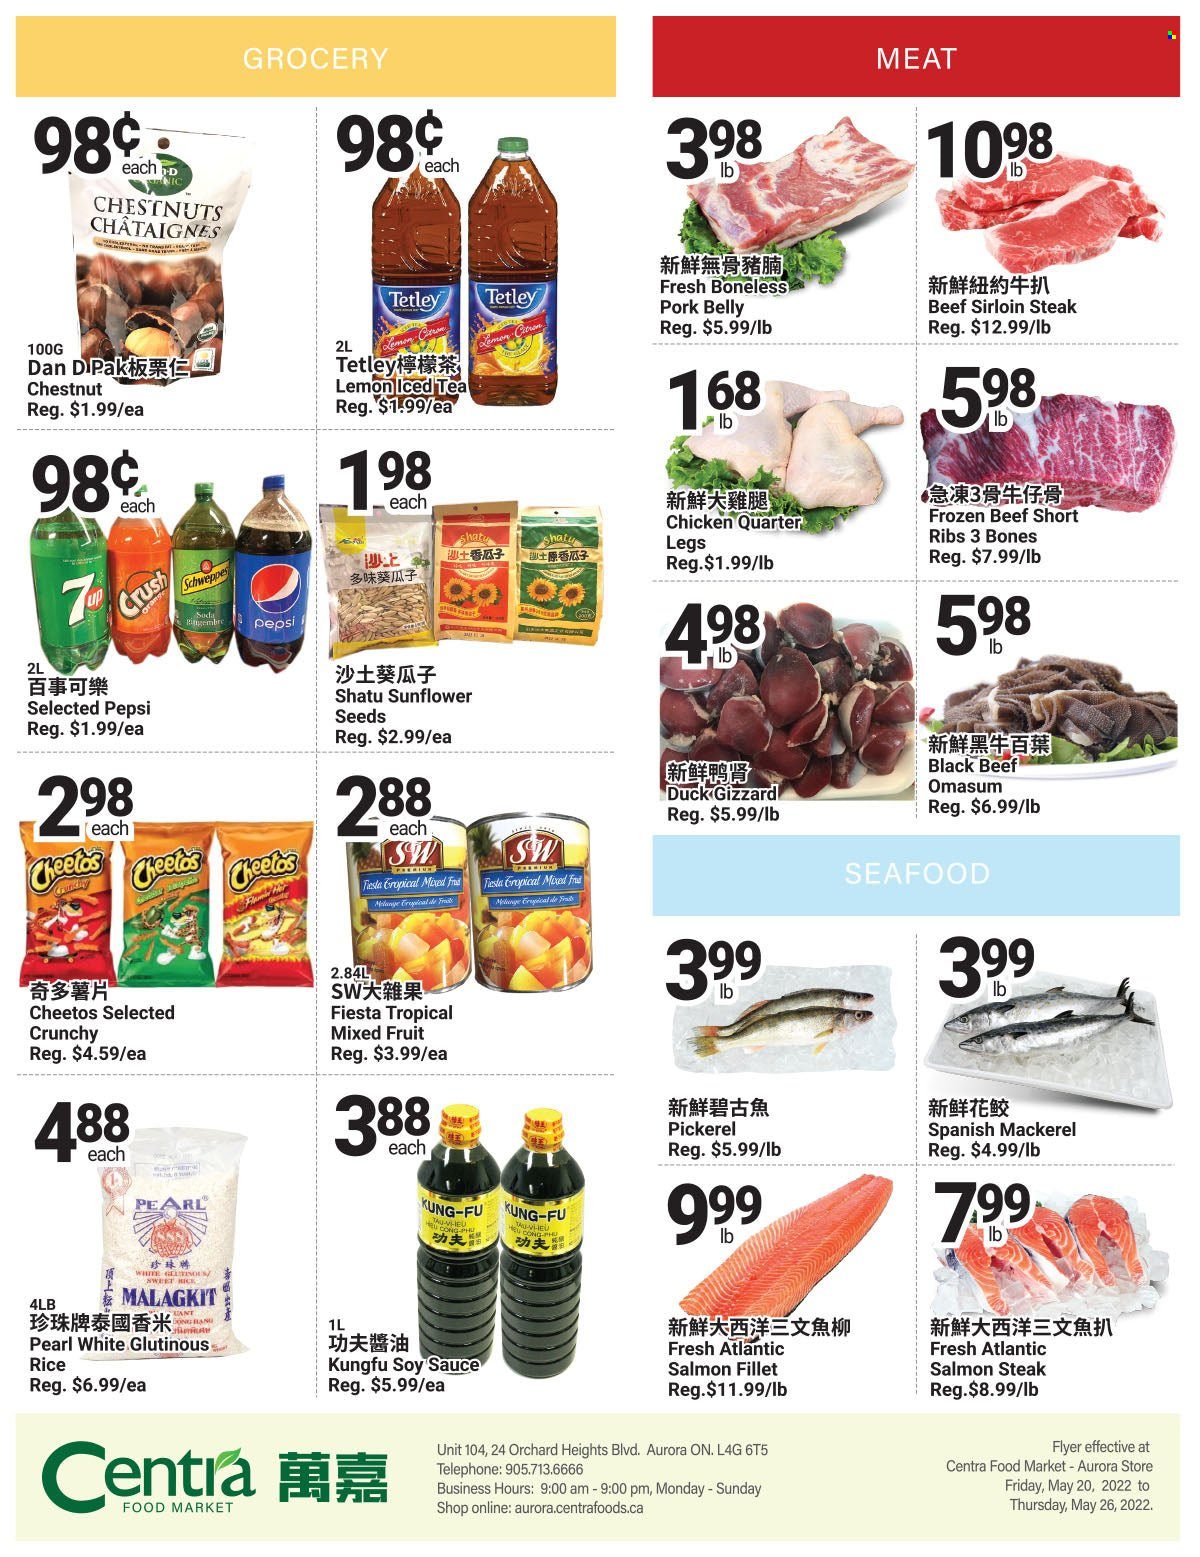 thumbnail - Centra Food Market Flyer - May 20, 2022 - May 26, 2022 - Sales products - mackerel, salmon, salmon fillet, seafood, walleye, sauce, Cheetos, rice, soy sauce, chestnuts, sunflower seeds, Schweppes, Pepsi, ice tea, beef meat, beef ribs, beef sirloin, sirloin steak, pork belly, pork meat, steak. Page 4.